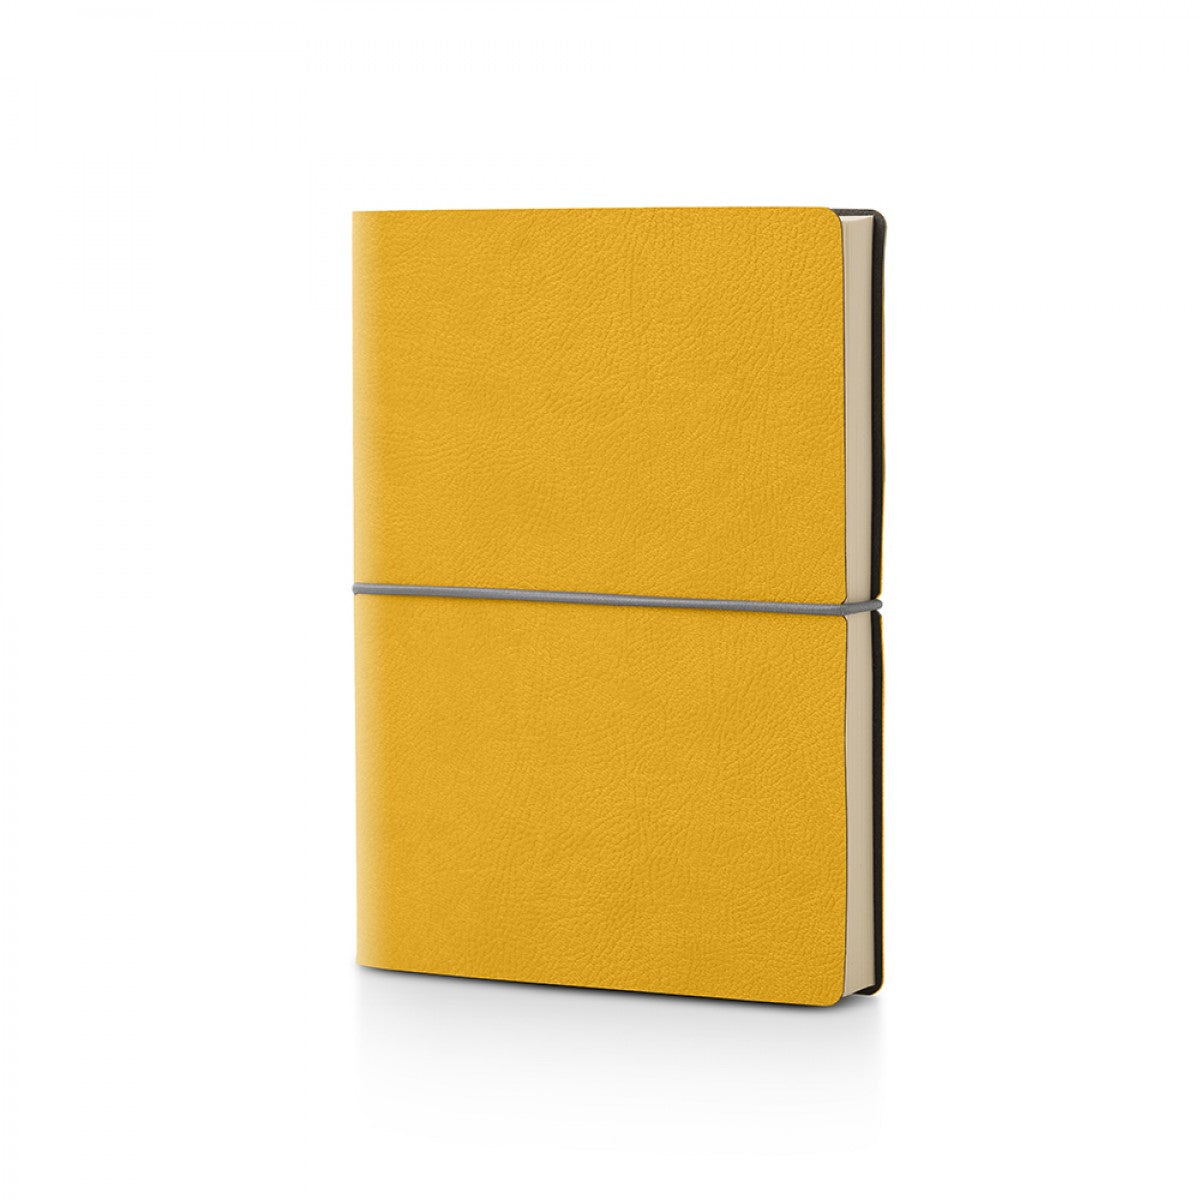 Ciak Smartbook Note Book Yellow 6" by 8"